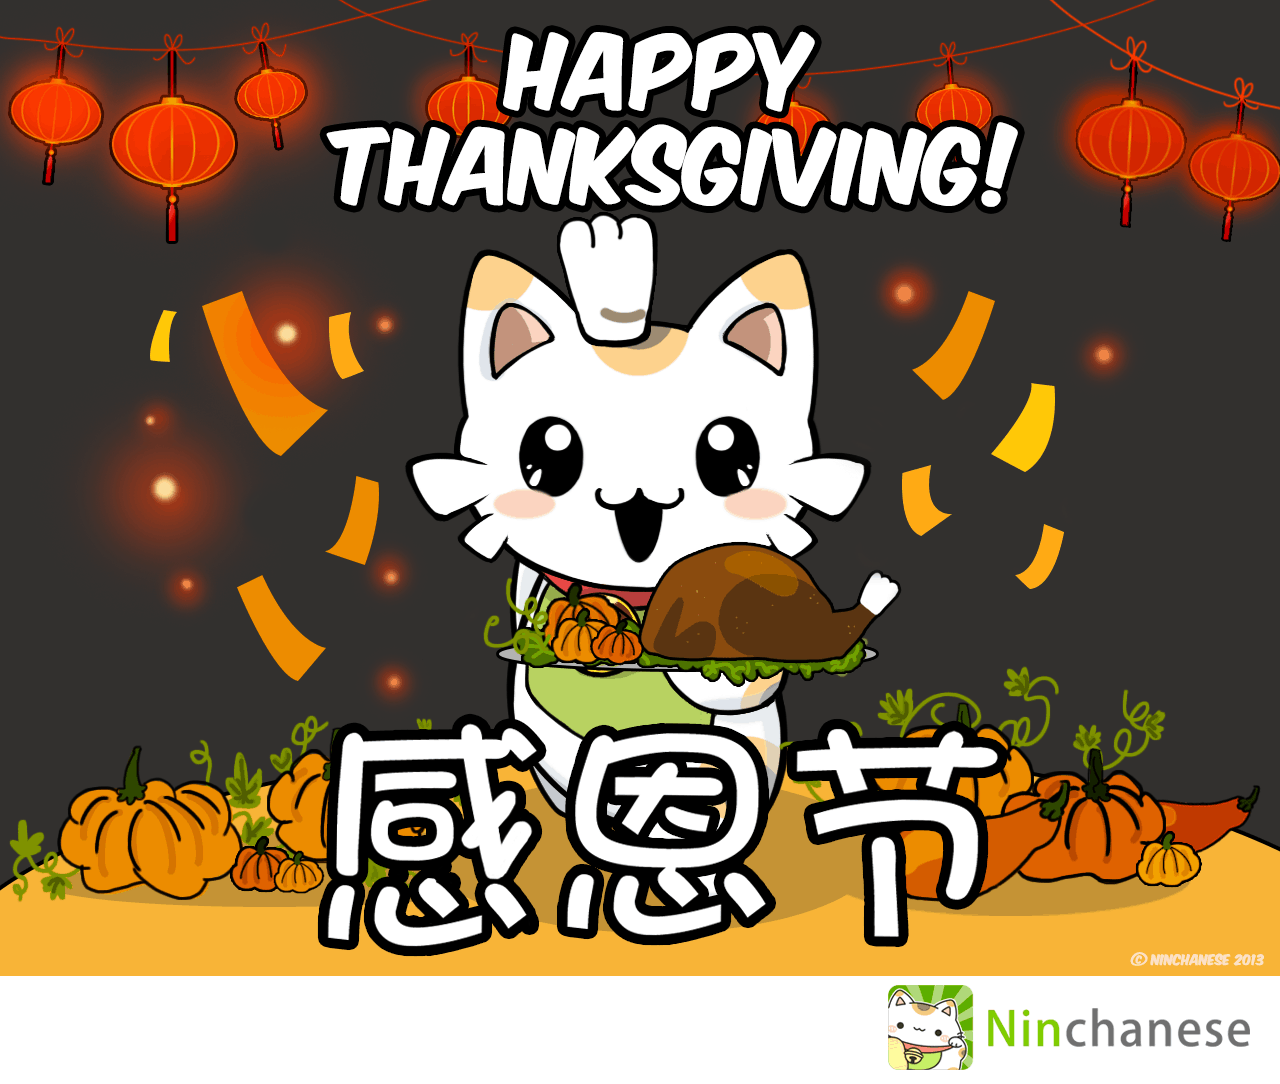 Happy thanksgiving in Chinese